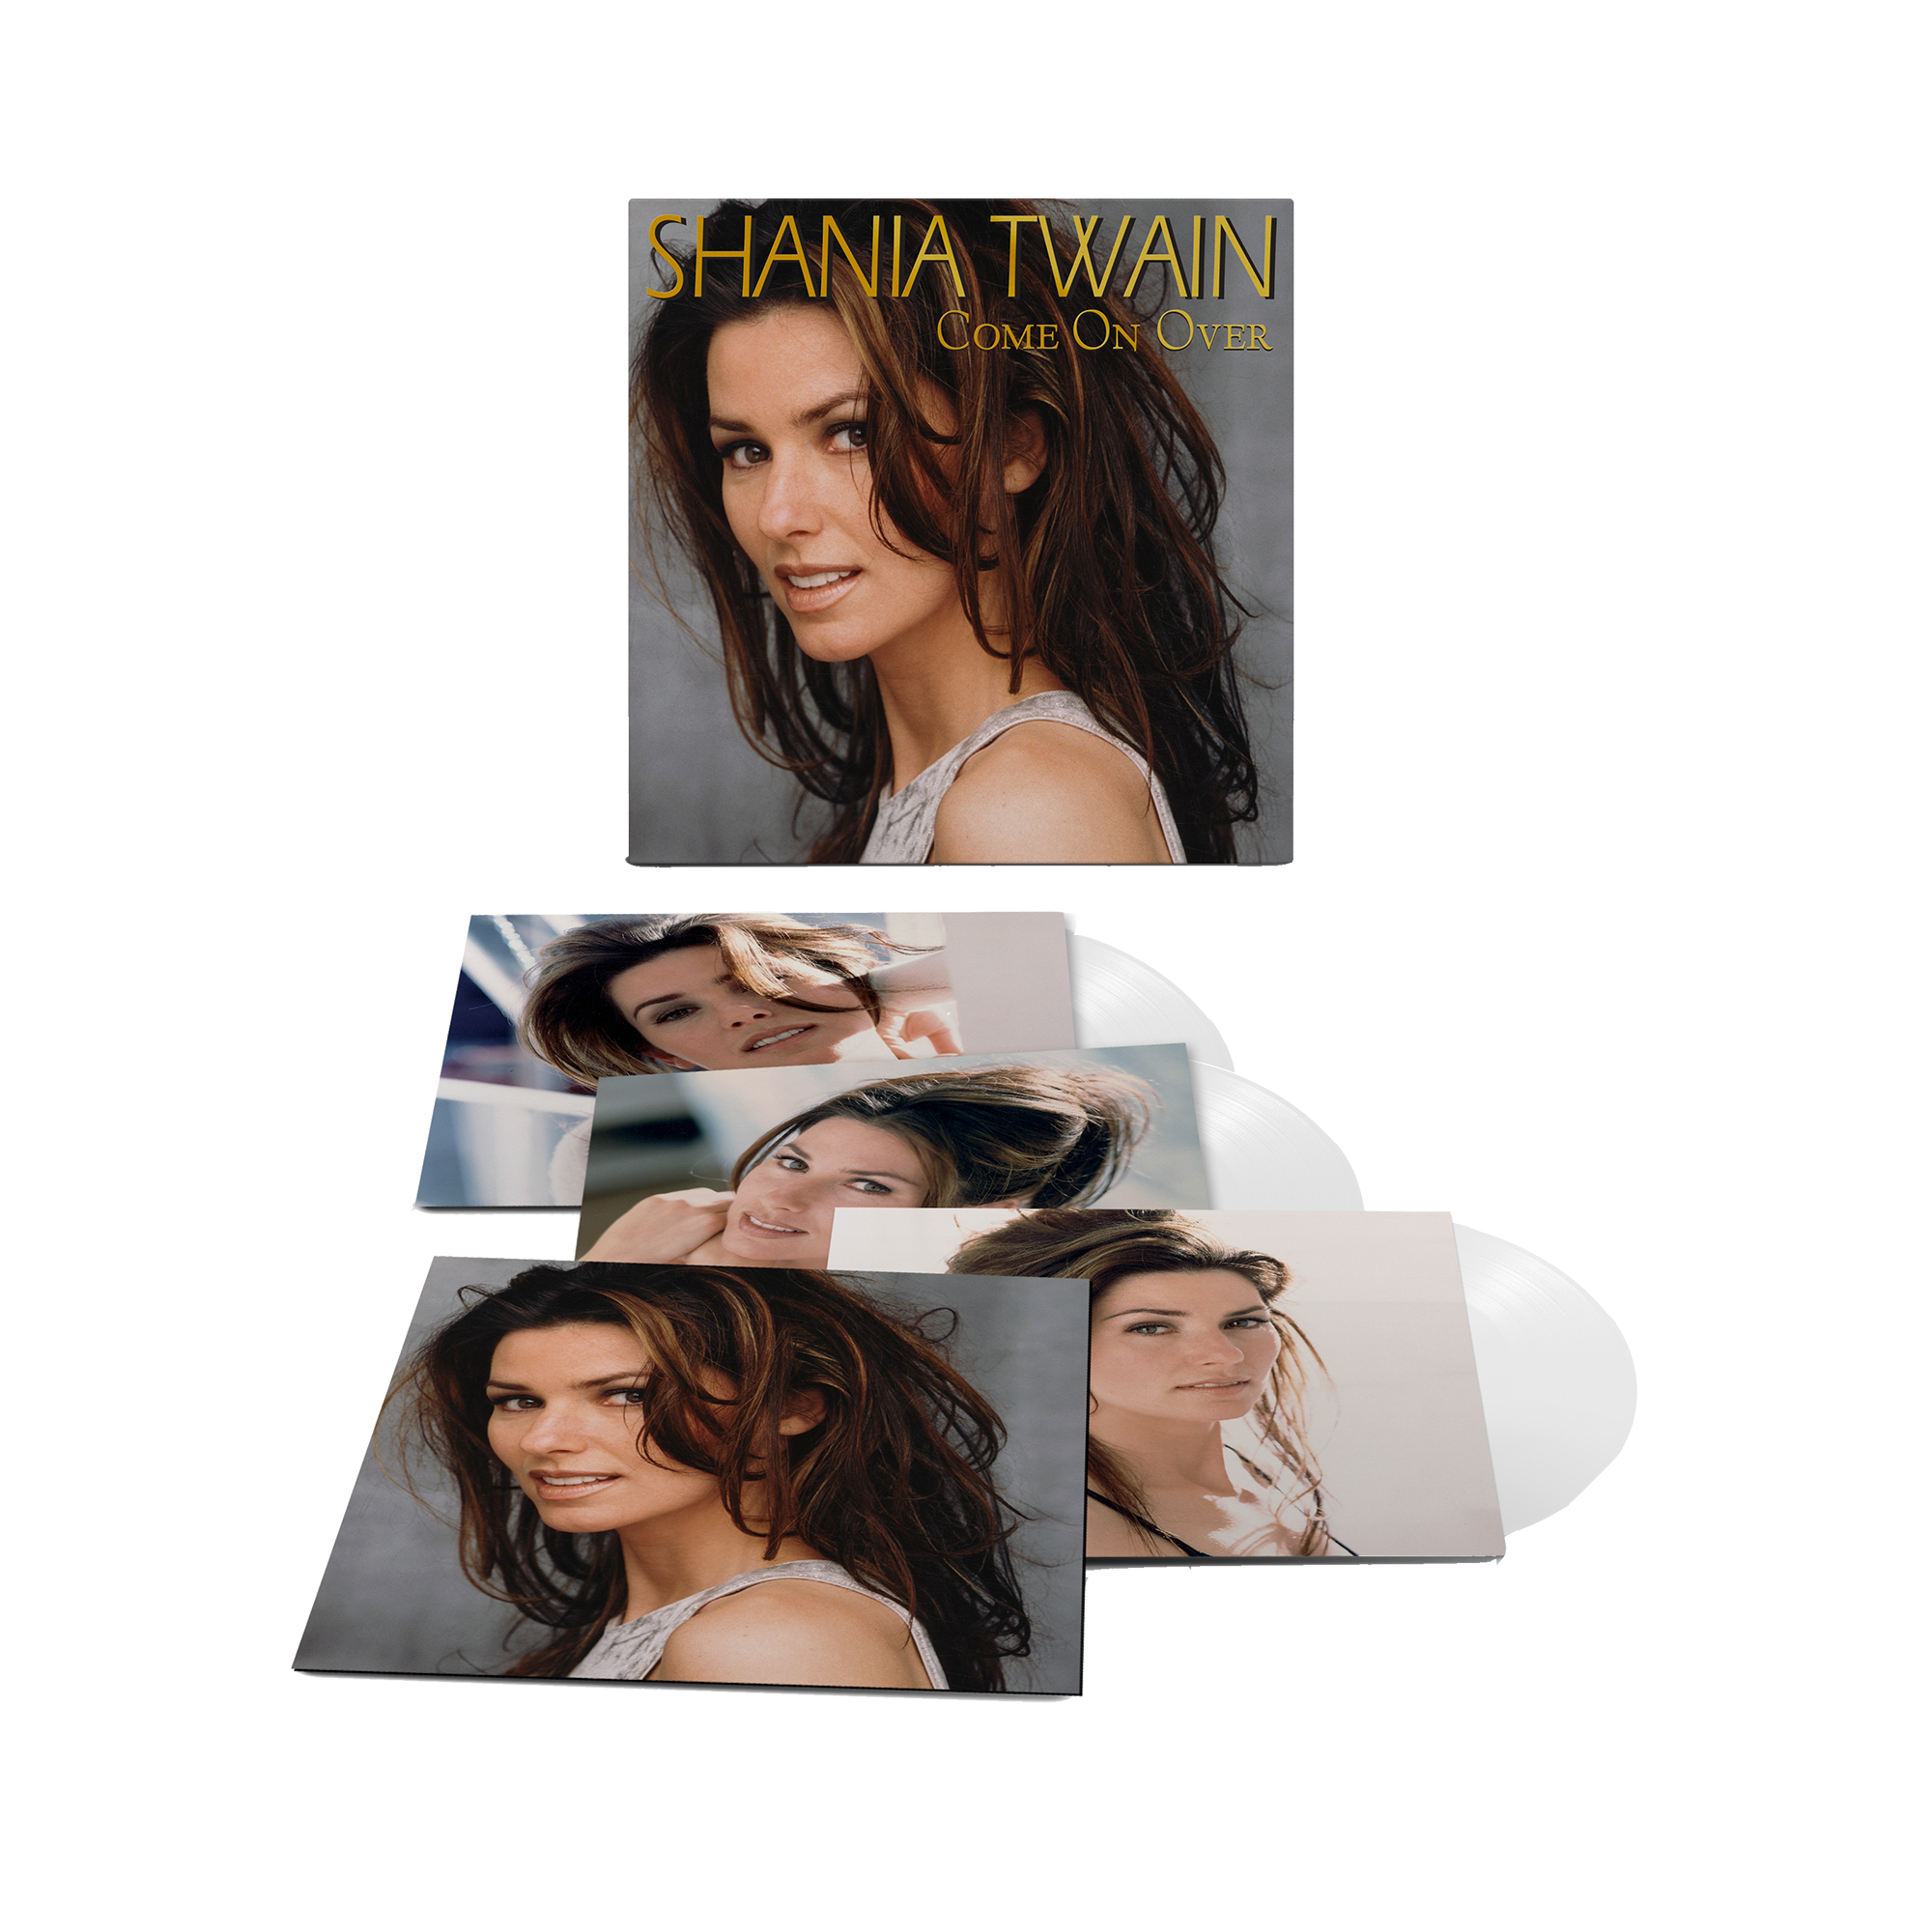 Come On Over (Diamond Edition): Ultra Clear Vinyl 3LP + Limited Signed Print